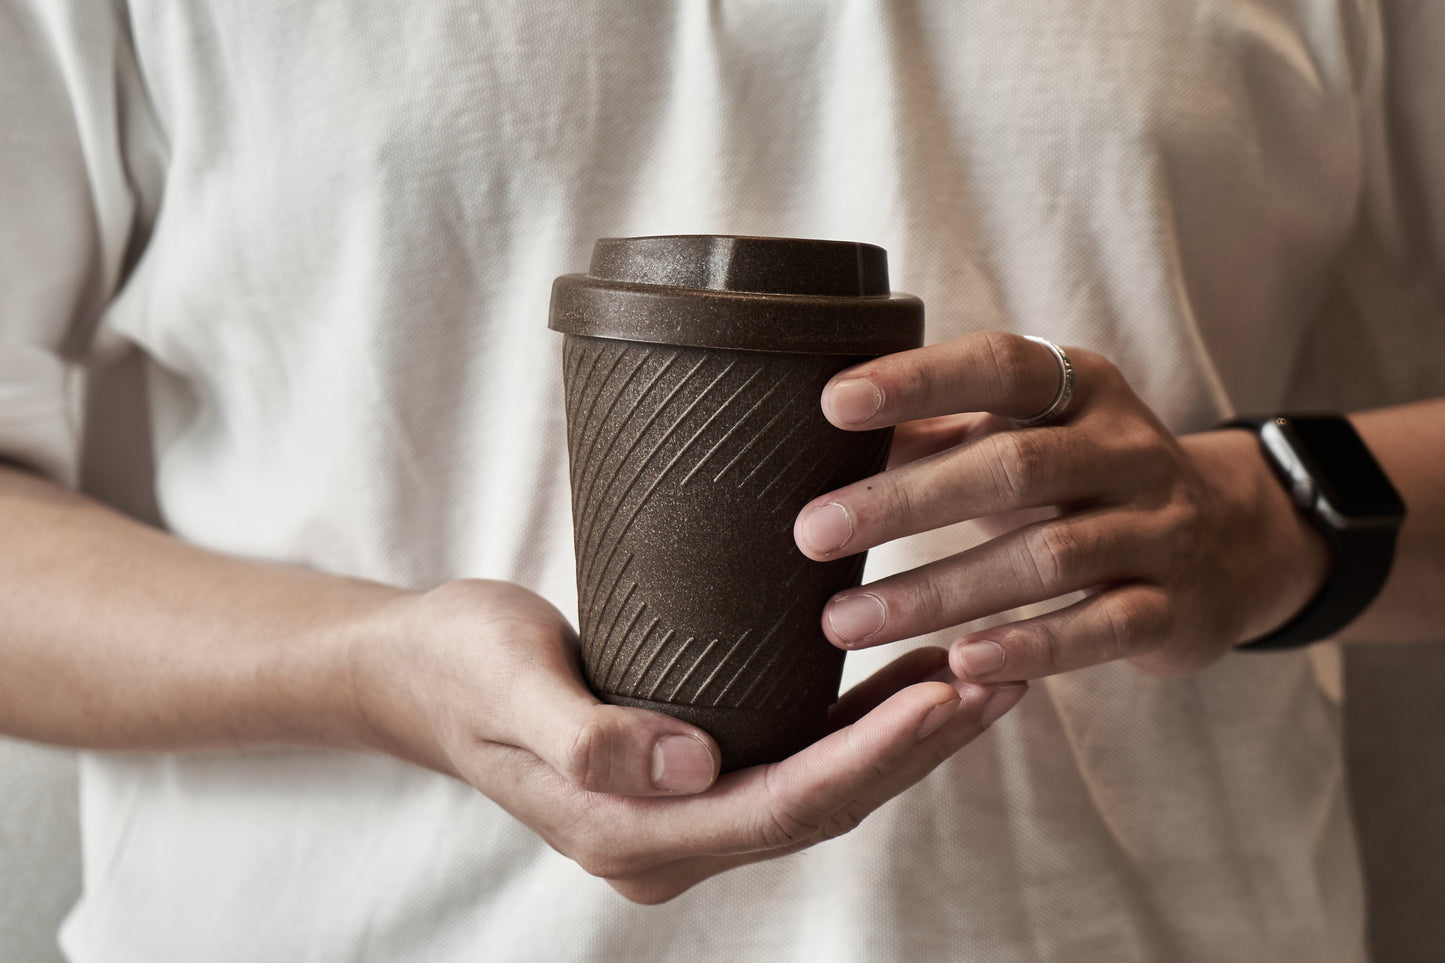 Togo Coffee Cup - More Coffee, Less Plastic!